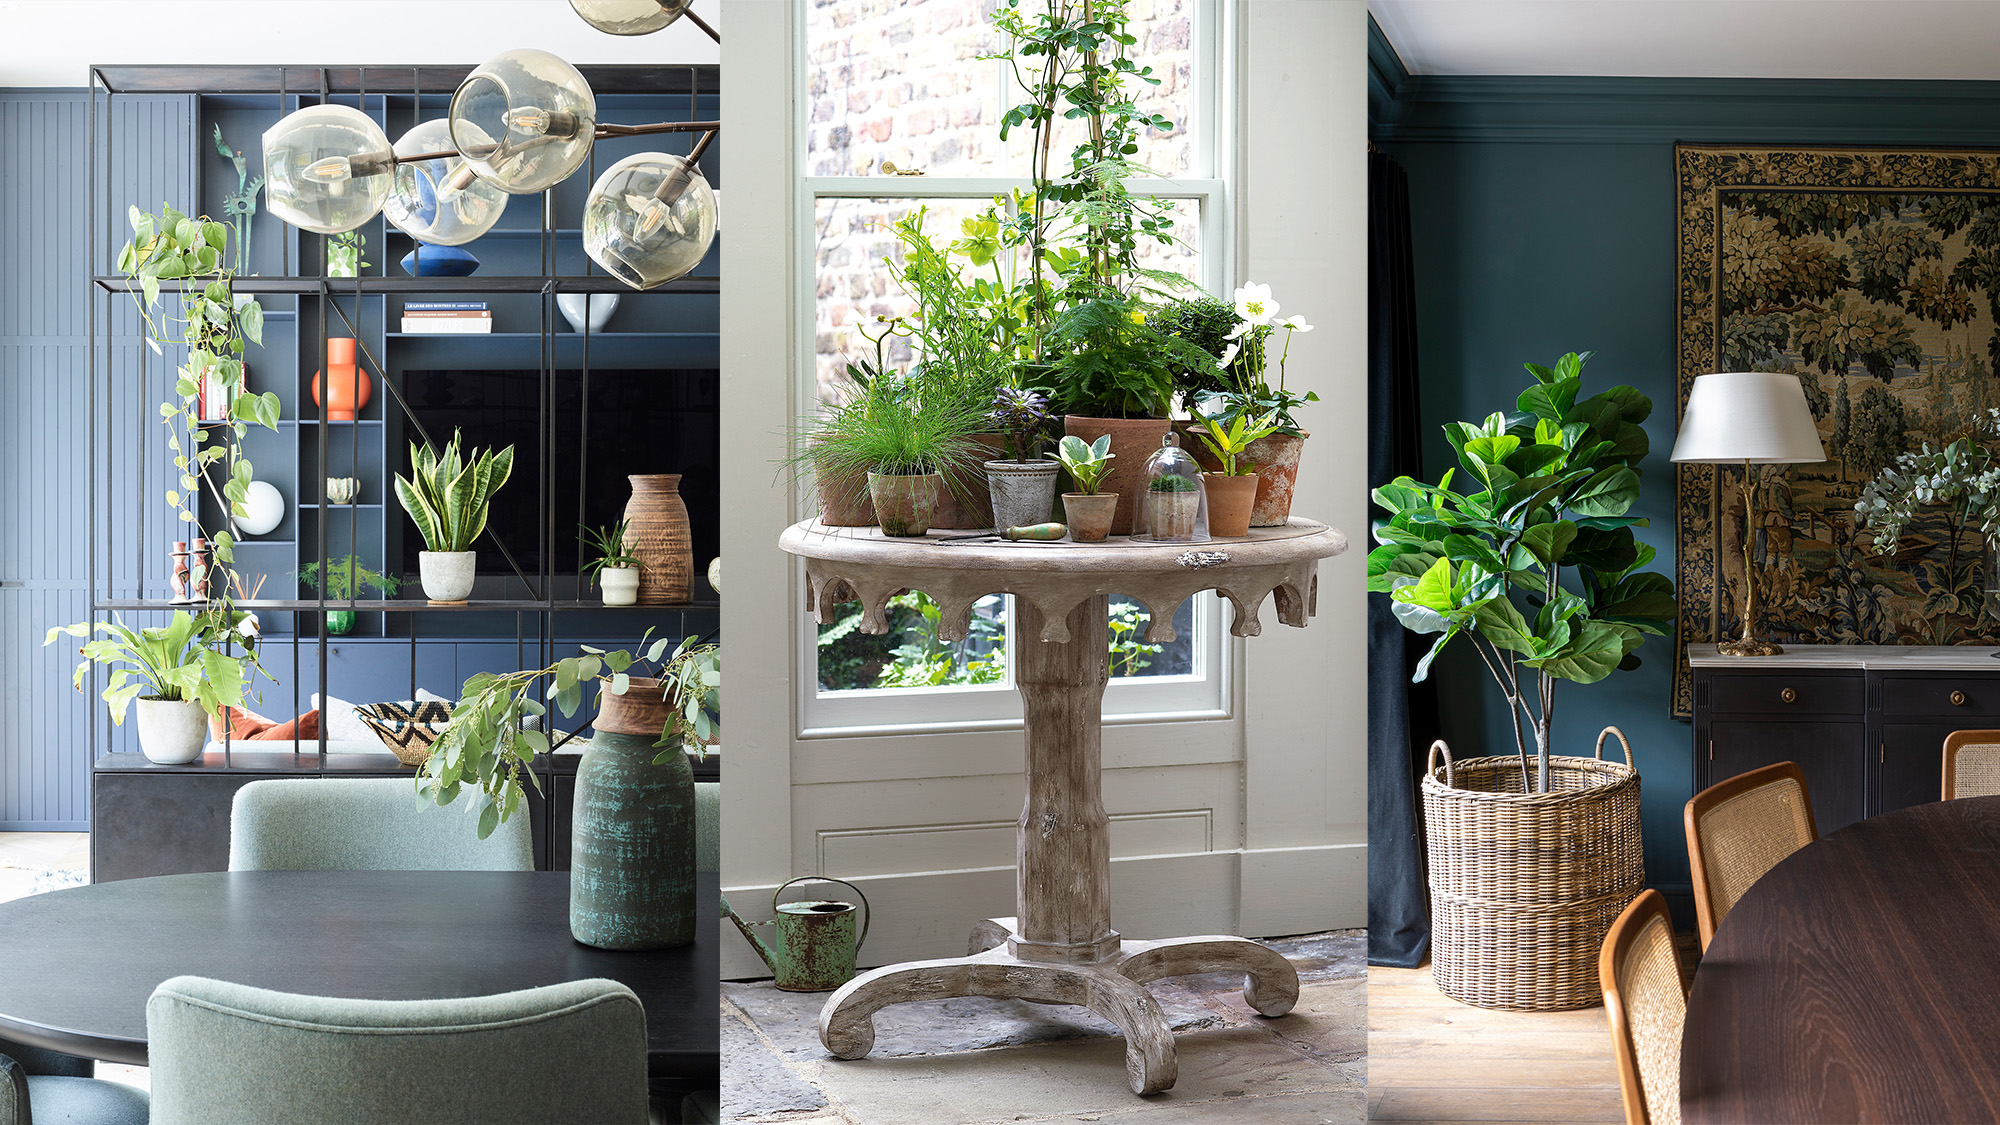 7 Indoor Creeper Plants To Transform Your Home Decor